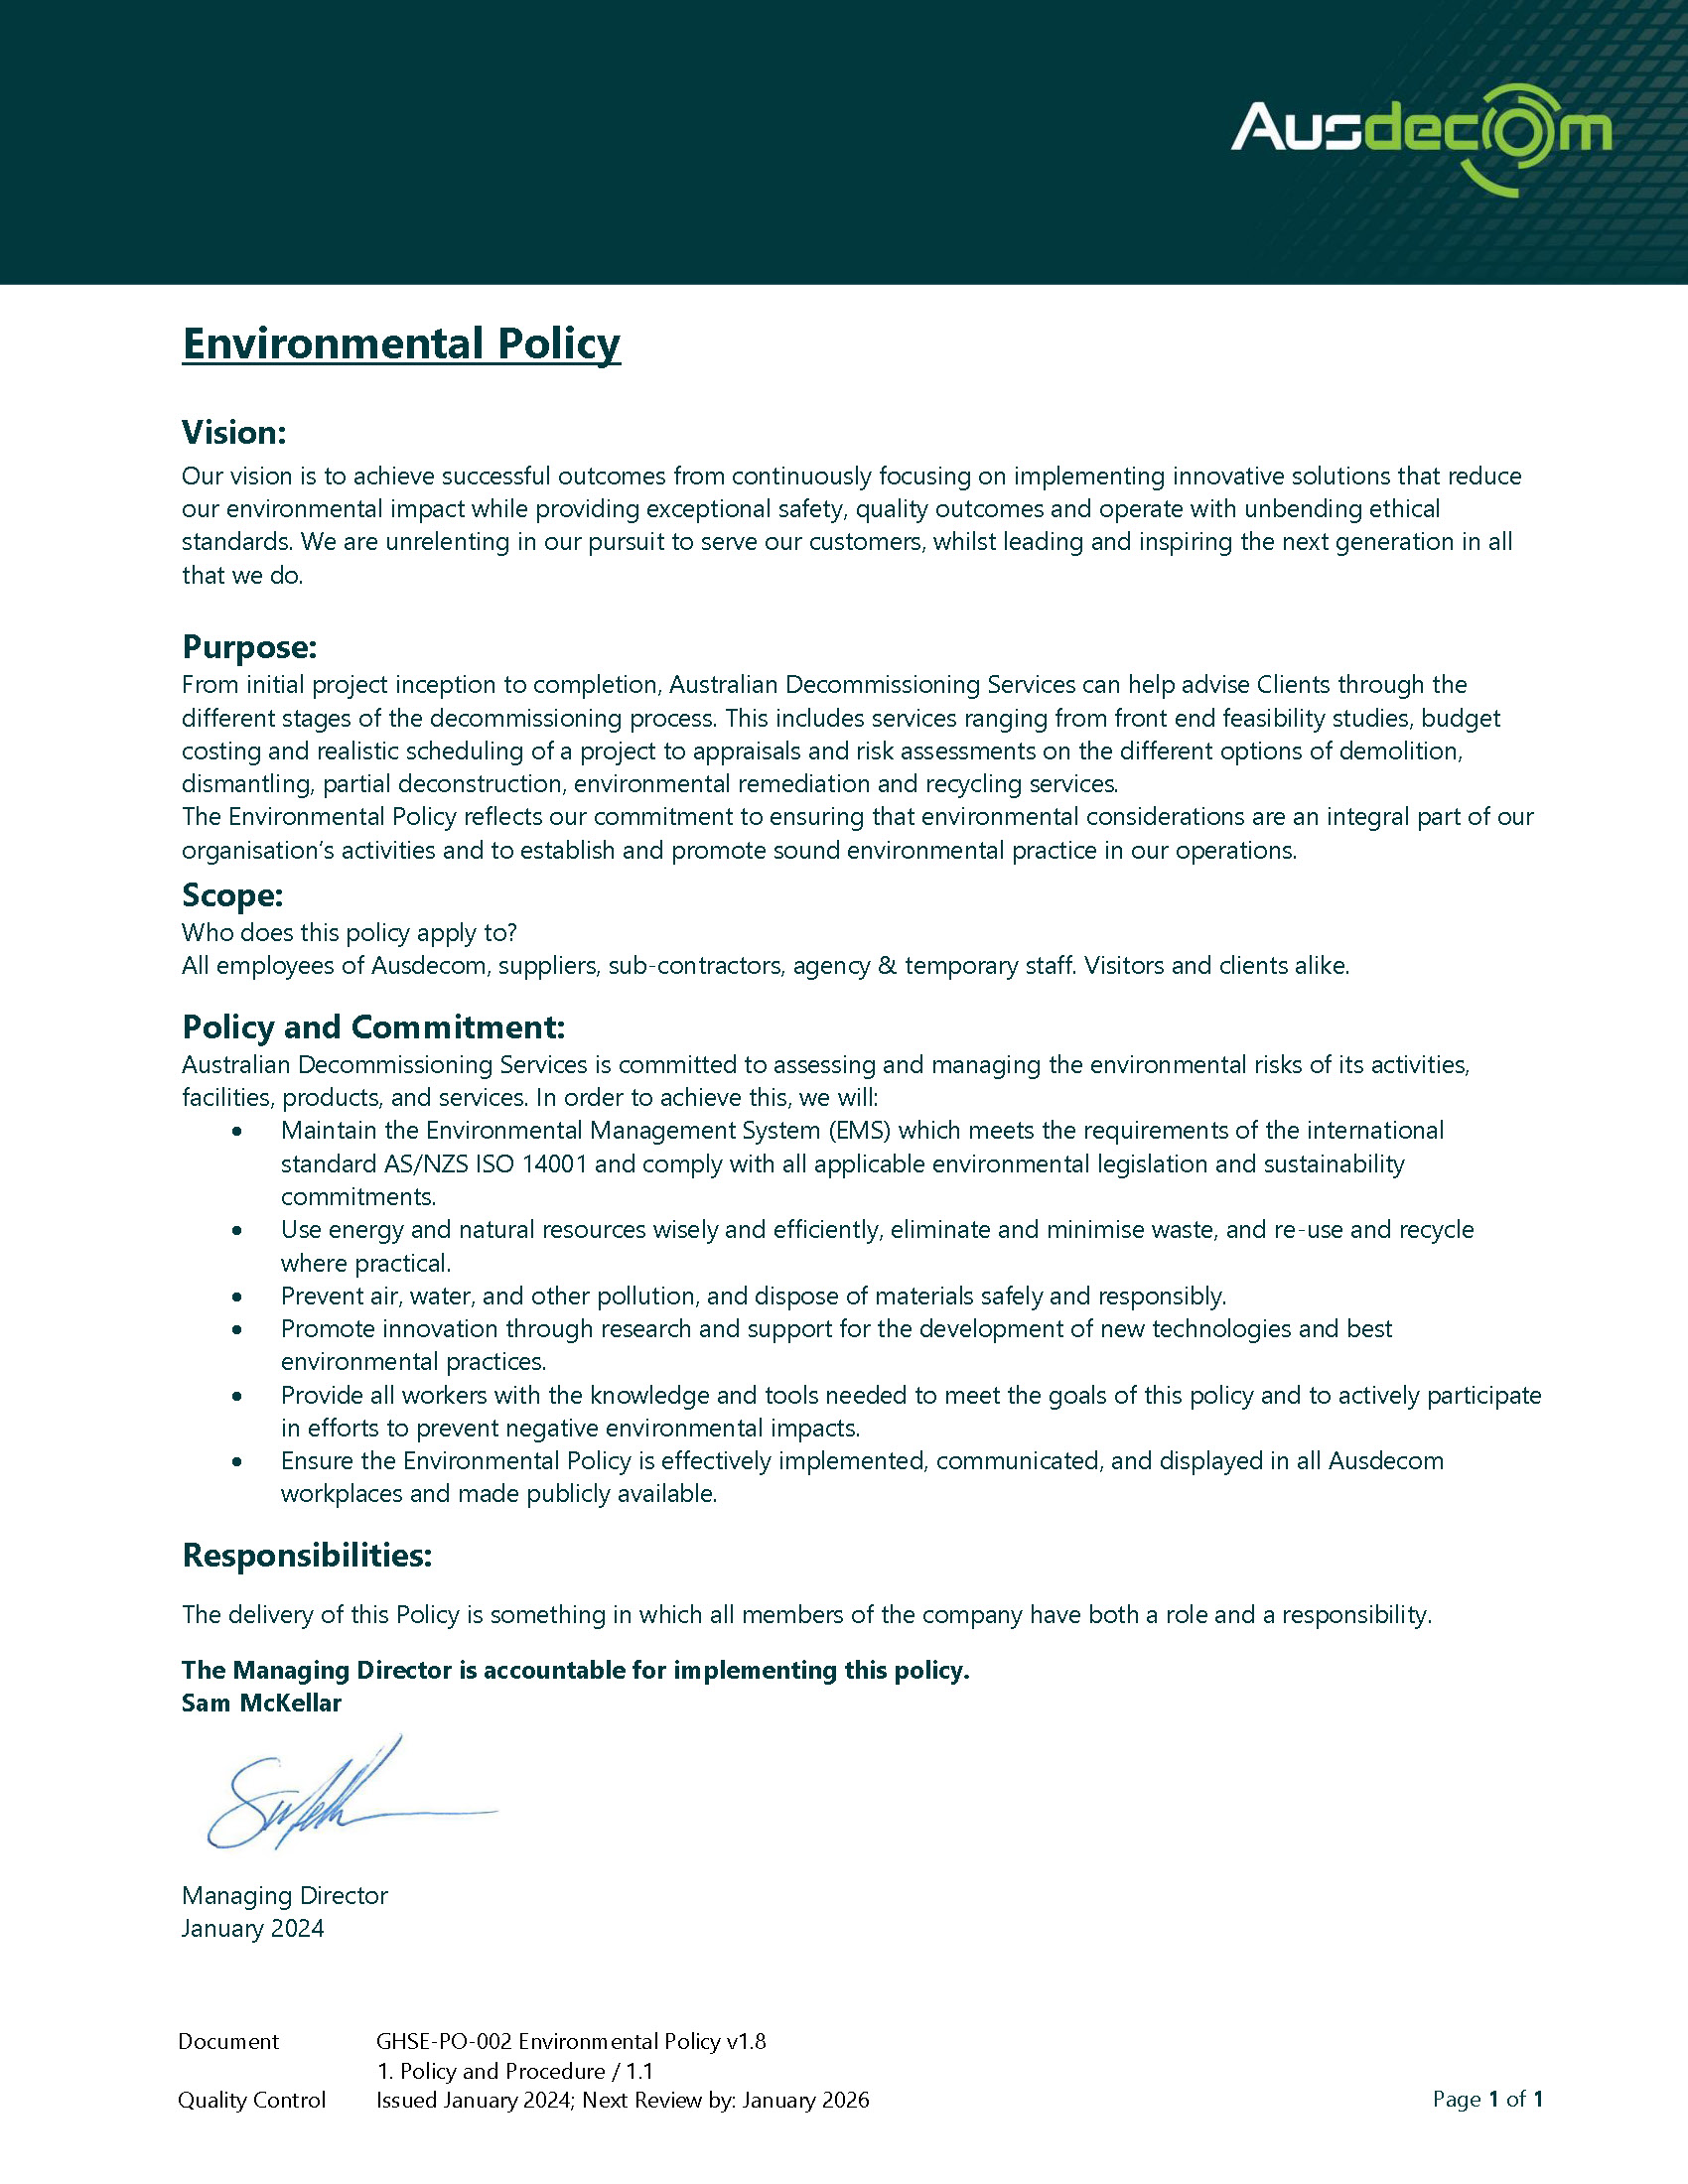 http://Environmental%20Policy